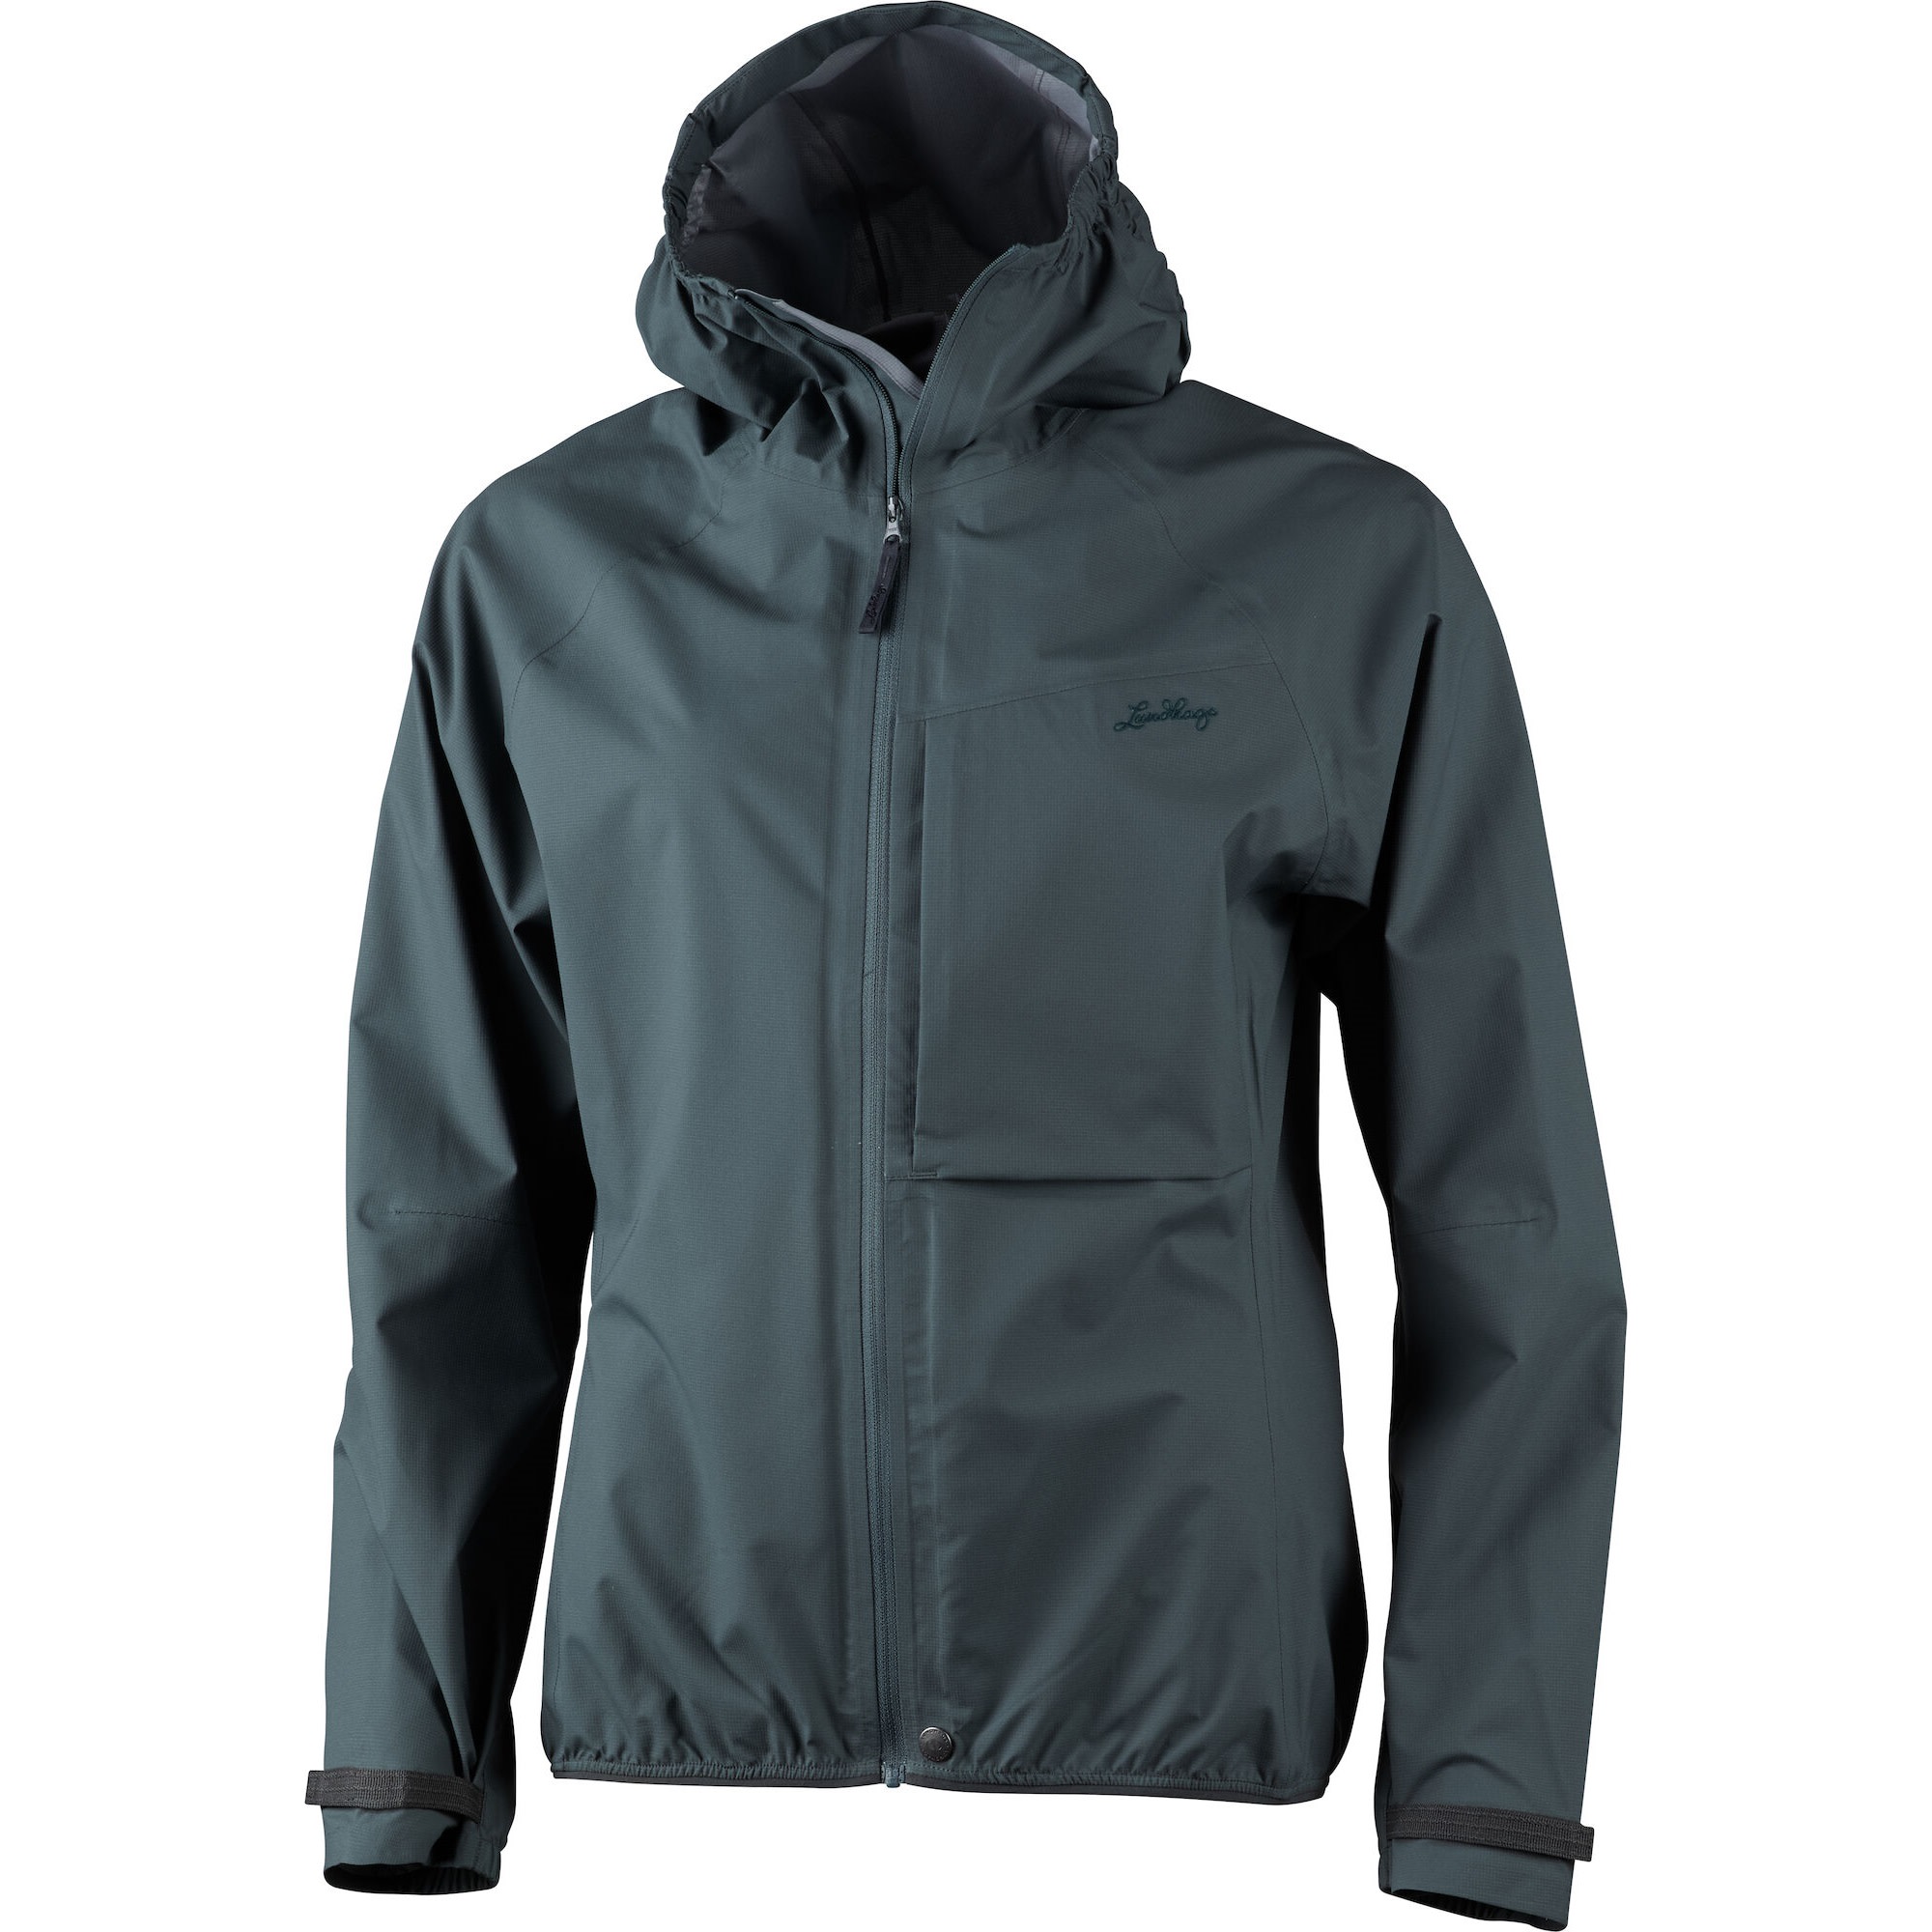 Lundhags Women’s Lo Jacket Dk Agave